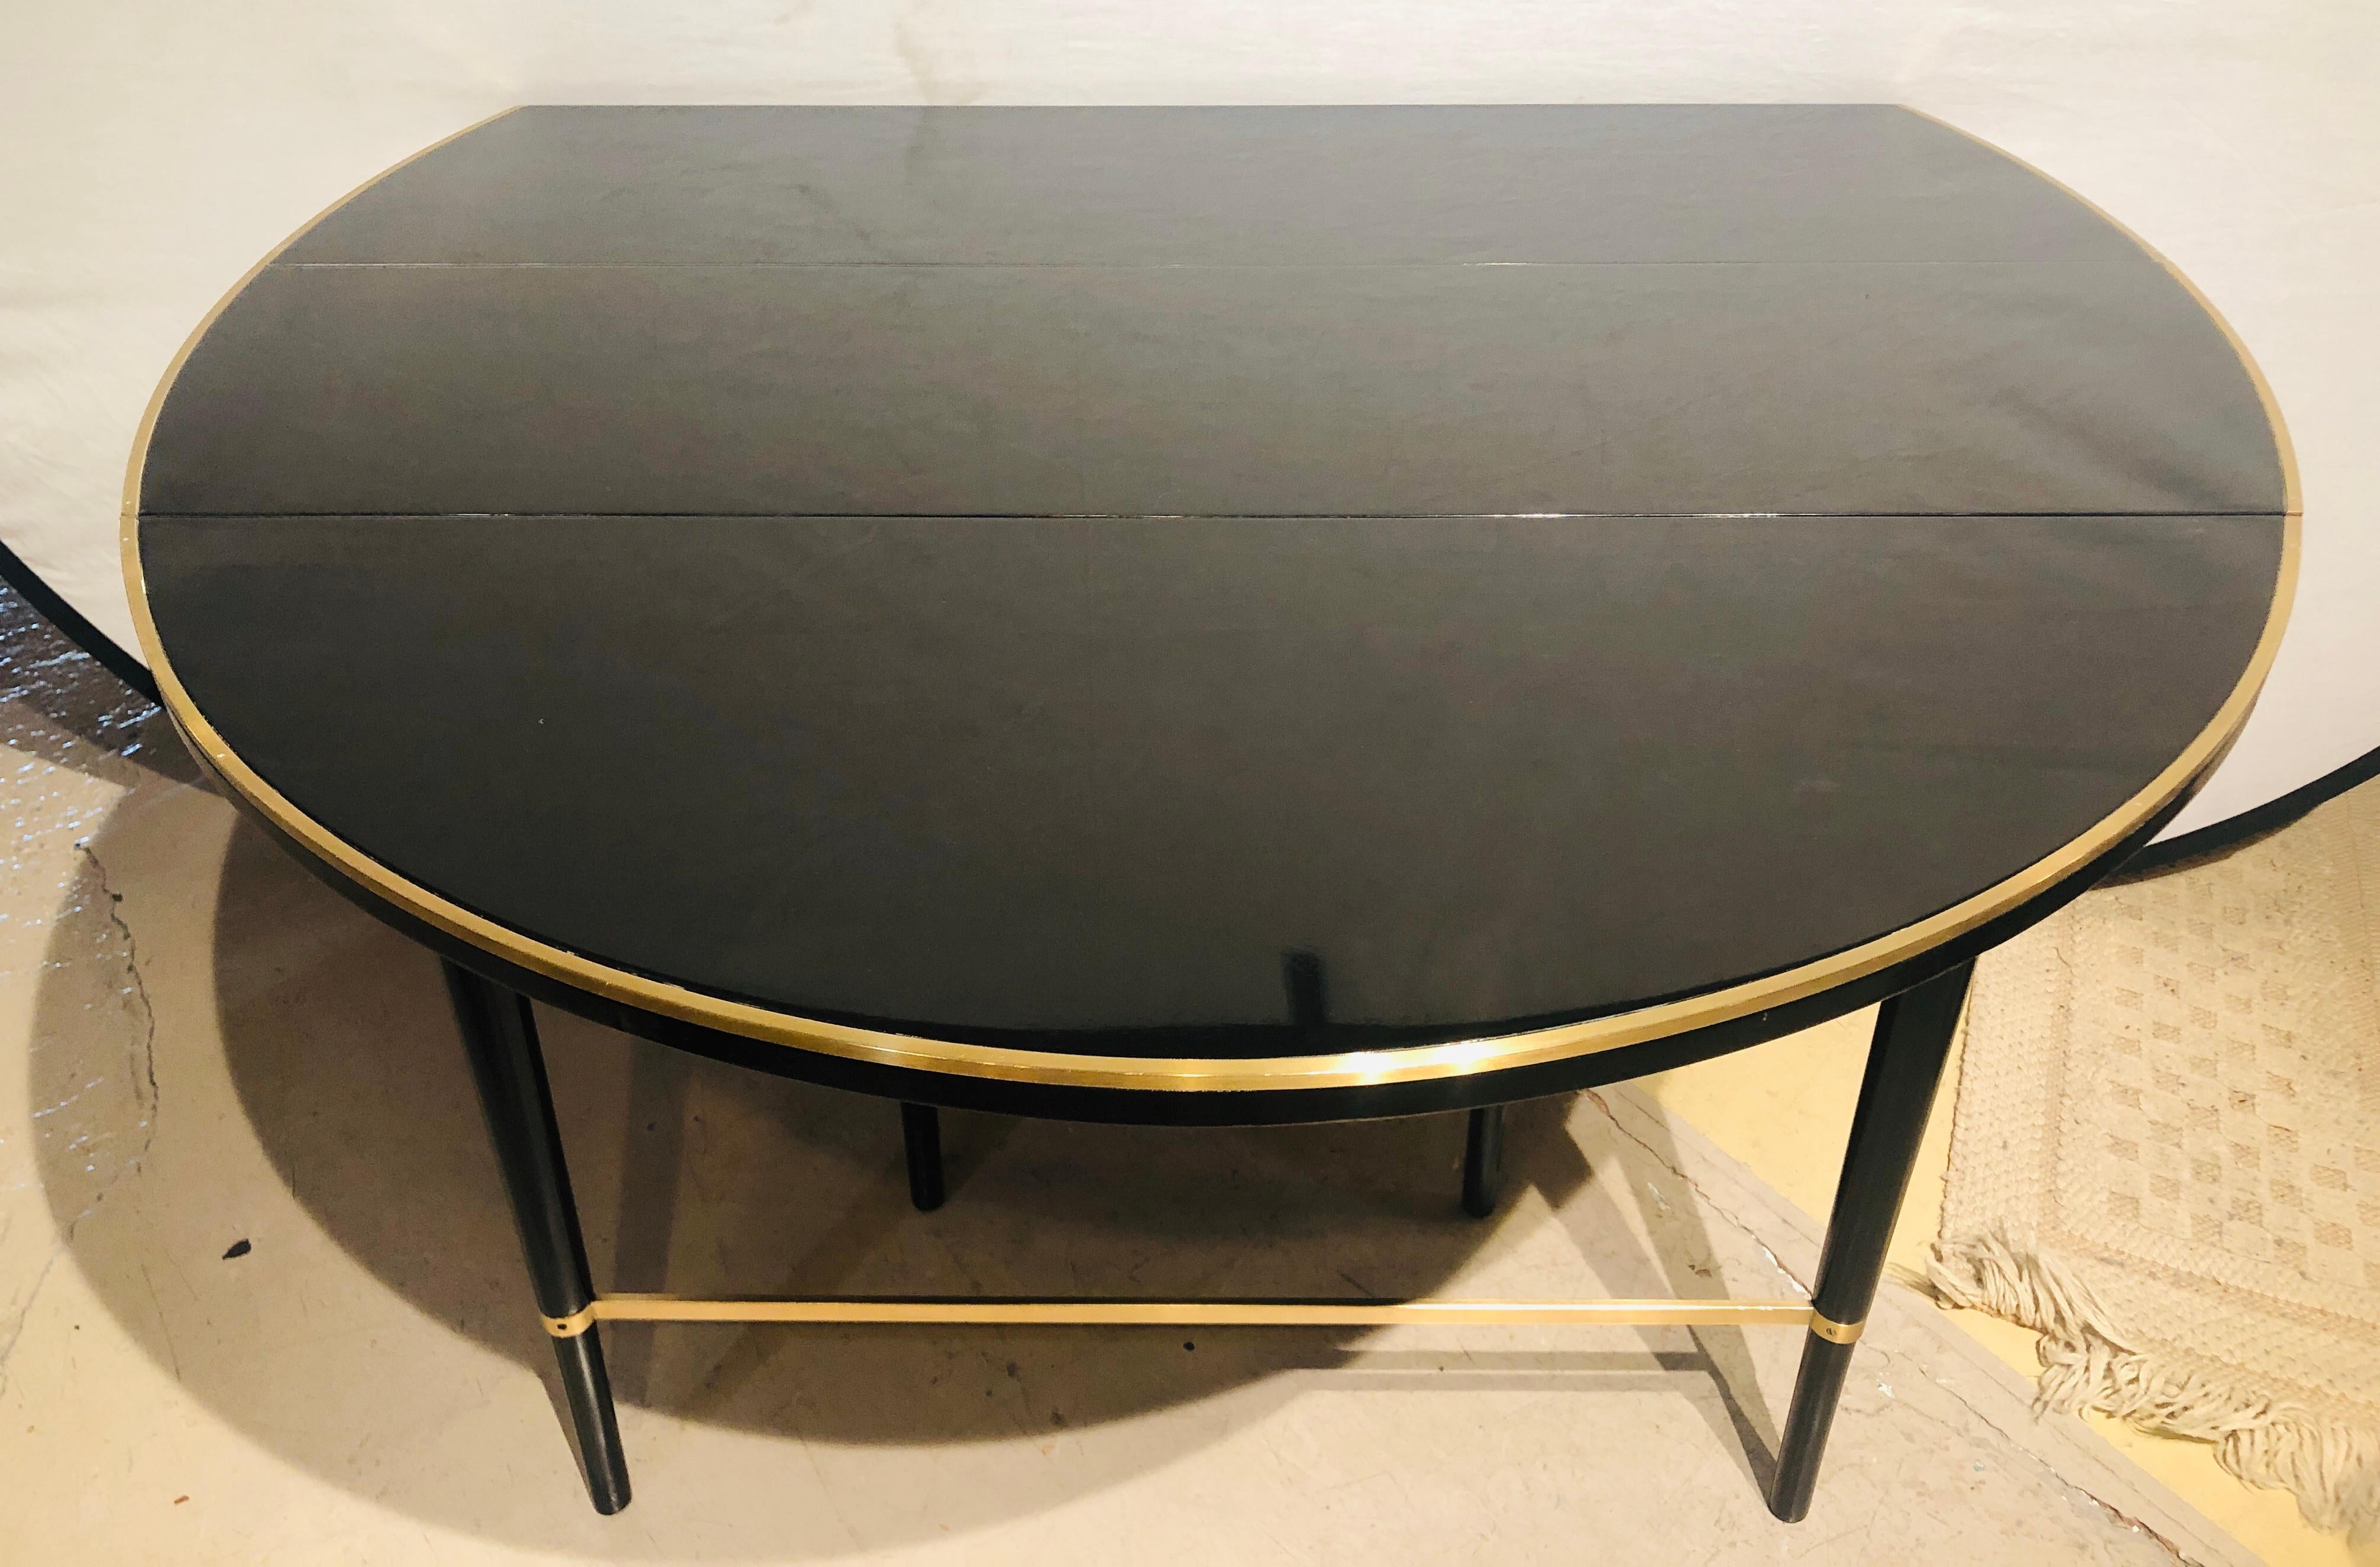 20th Century Mid-Century Modern Black Lacquered Paul McCobb Serving / Dining Table 5 Leaves